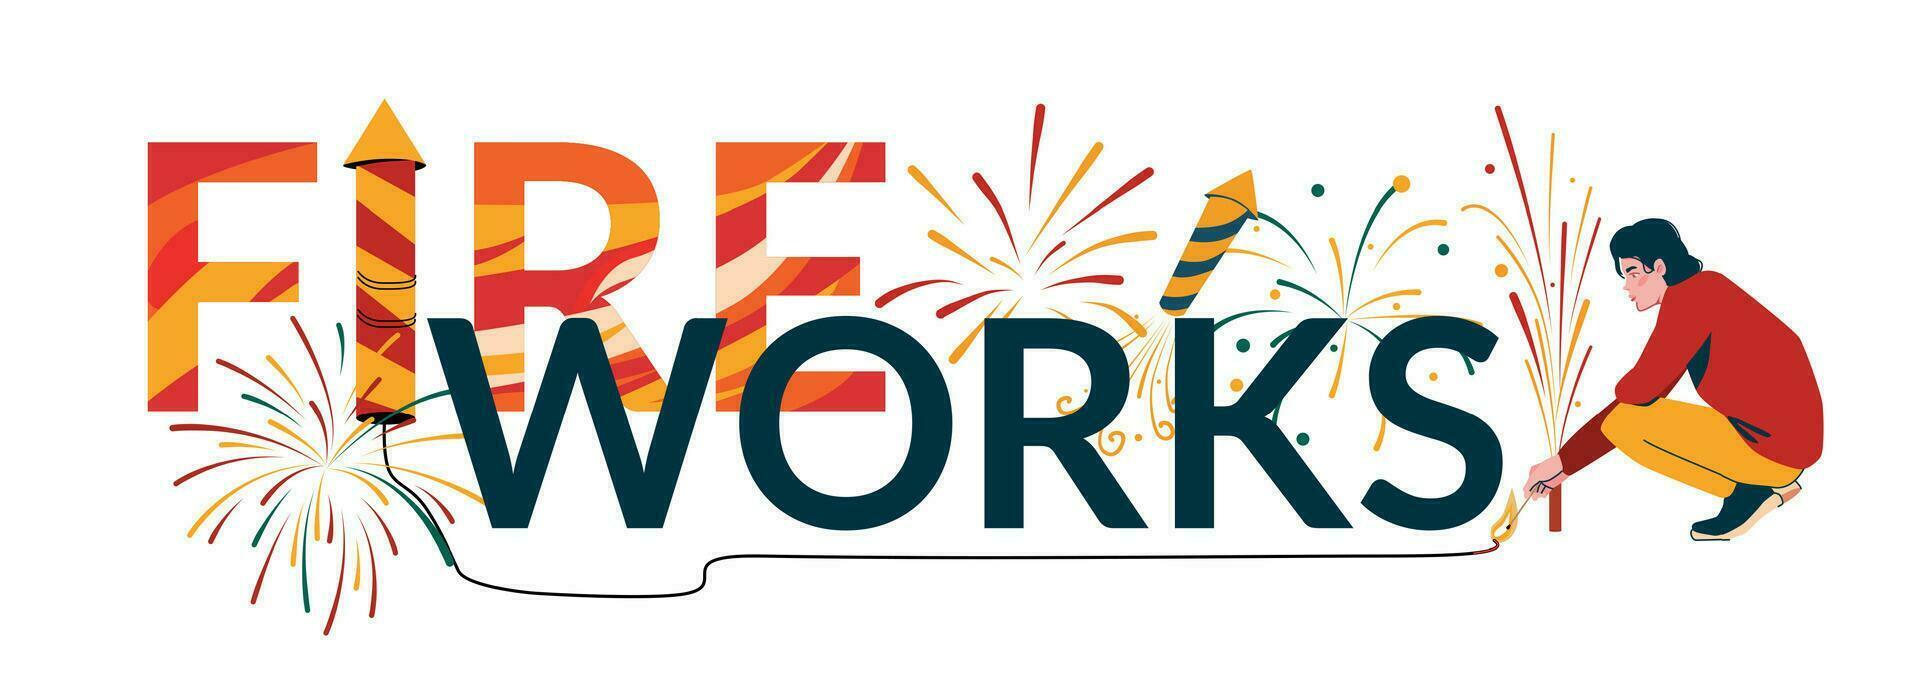 Pyrotechnics Fireworks Launch Flat Text Composition vector